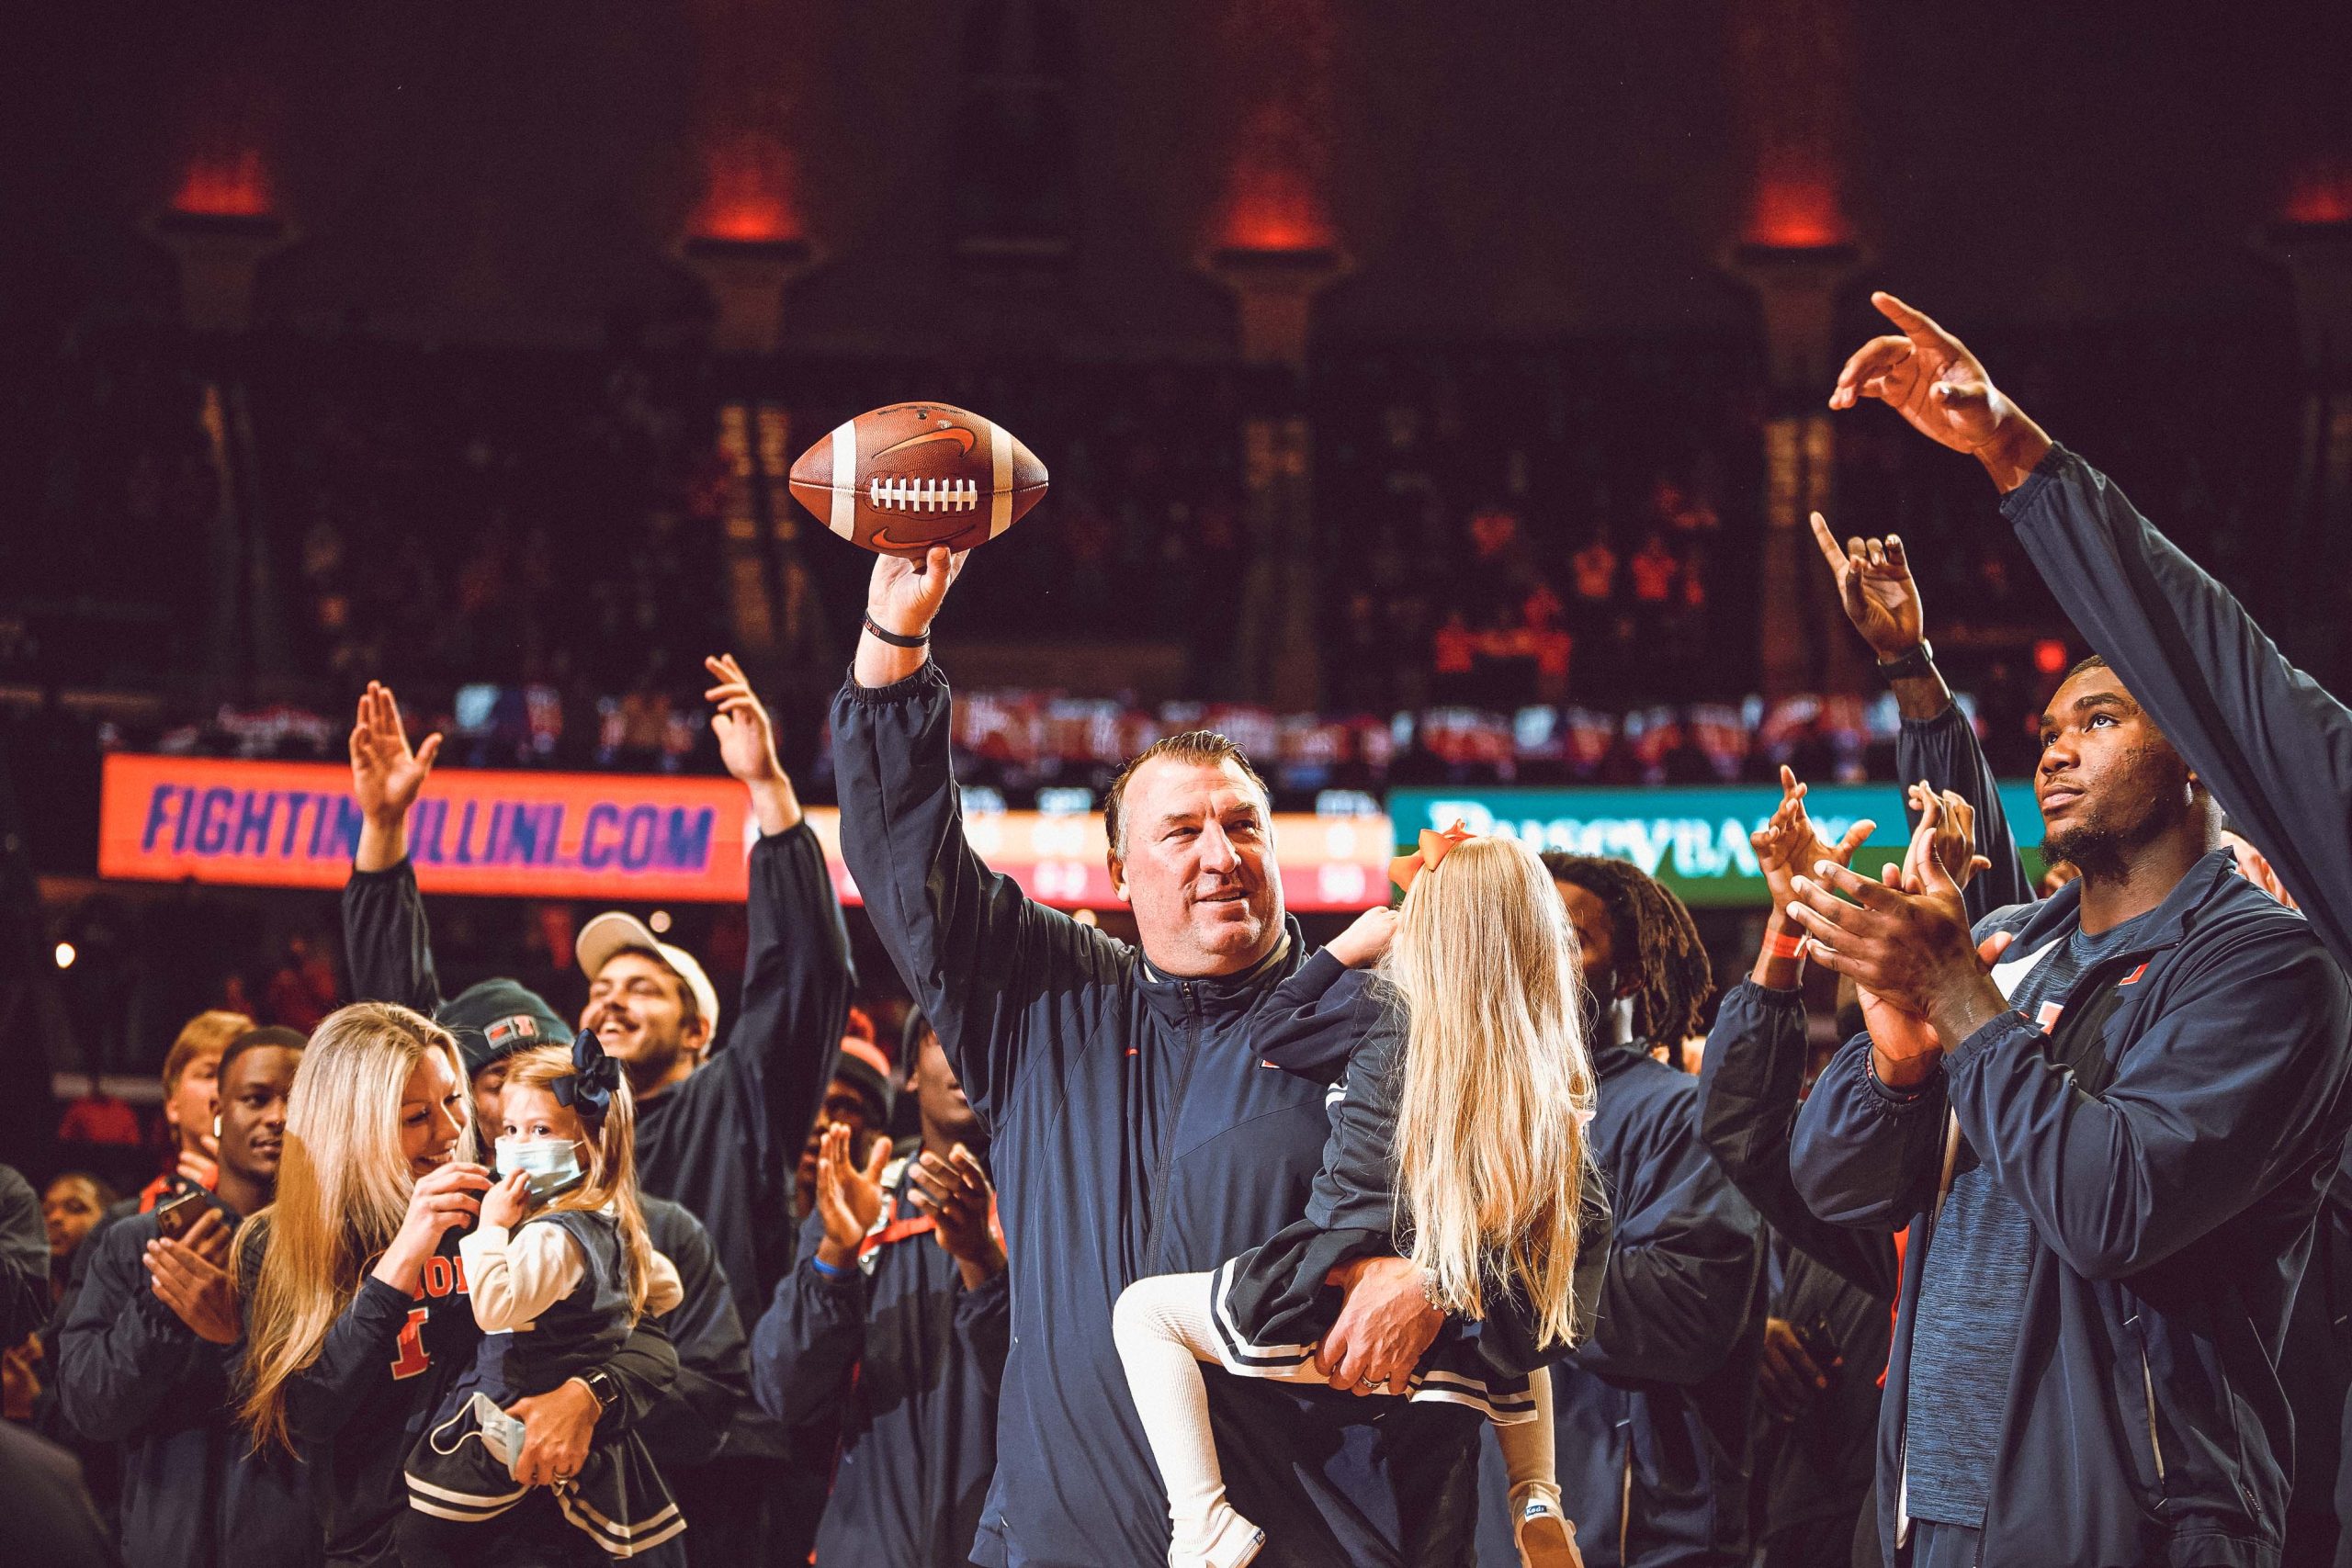 COLUMN: Bielema’s Decision to Replace Offensive Coordinator Immediately Shows New Attitude in Illini Football Leadership